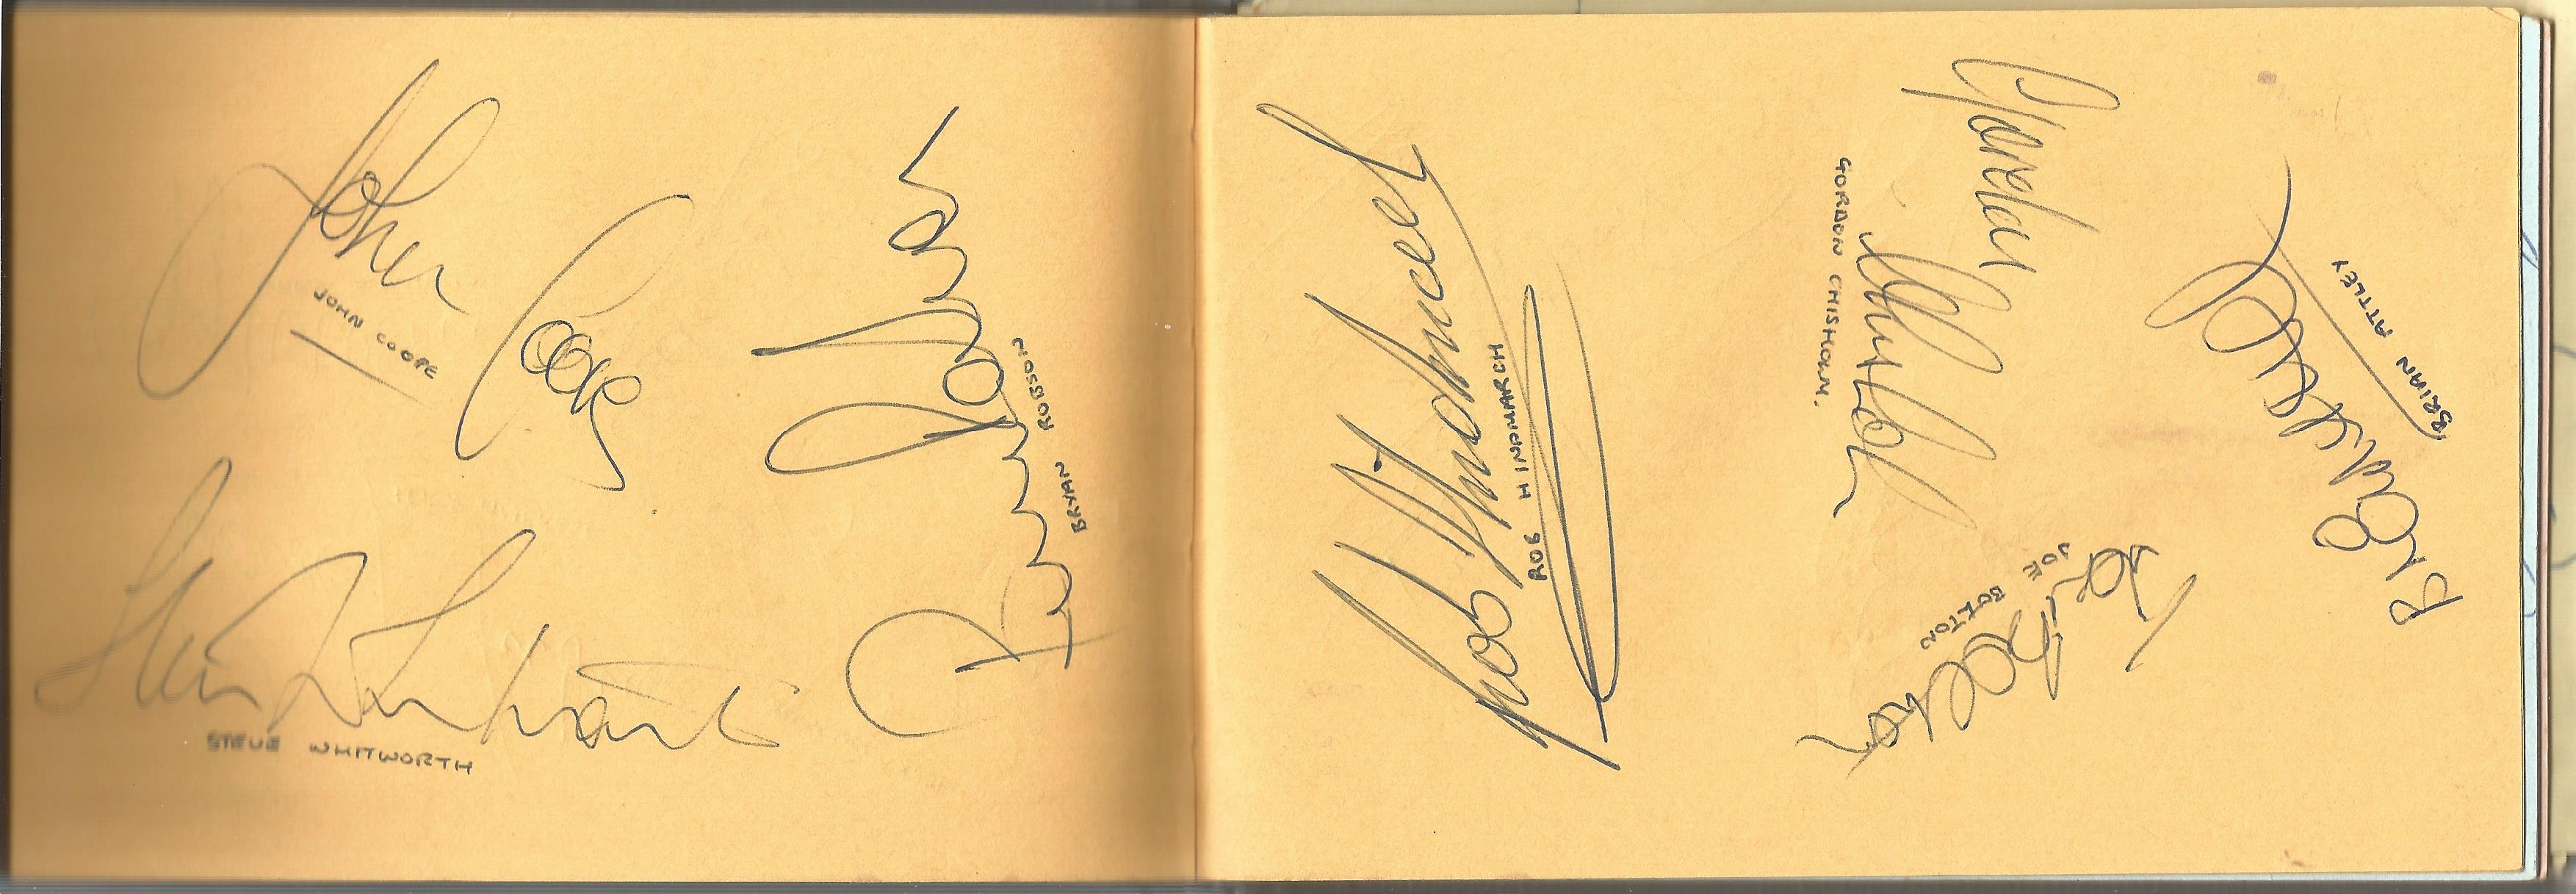 Football and Cricket Legends Autograph book over 150 signatures from some legendary names of the - Image 6 of 8